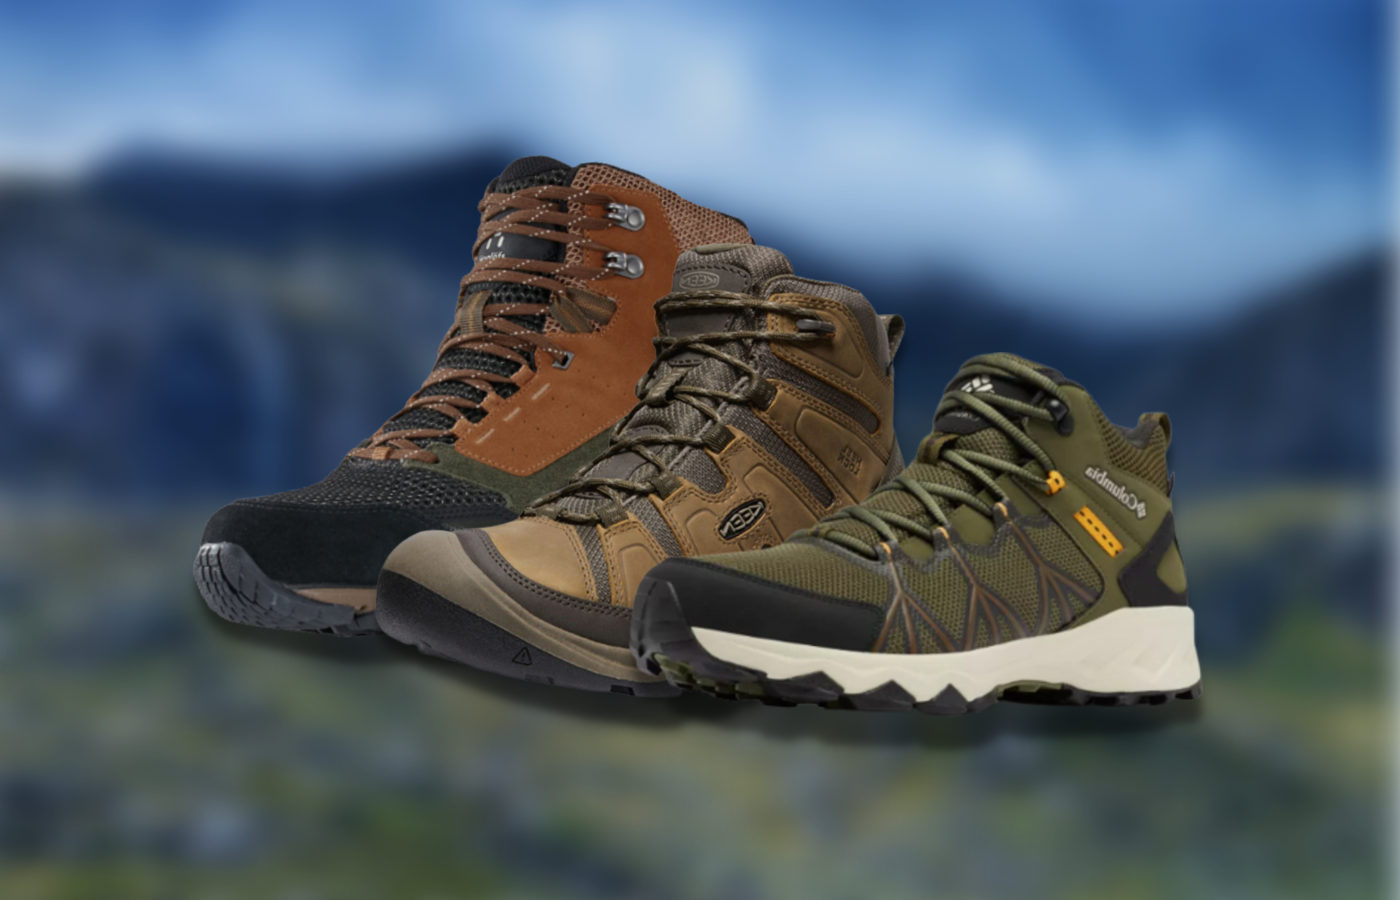 The 12 Best Hiking Boots For Pacific Northwest Trails (According